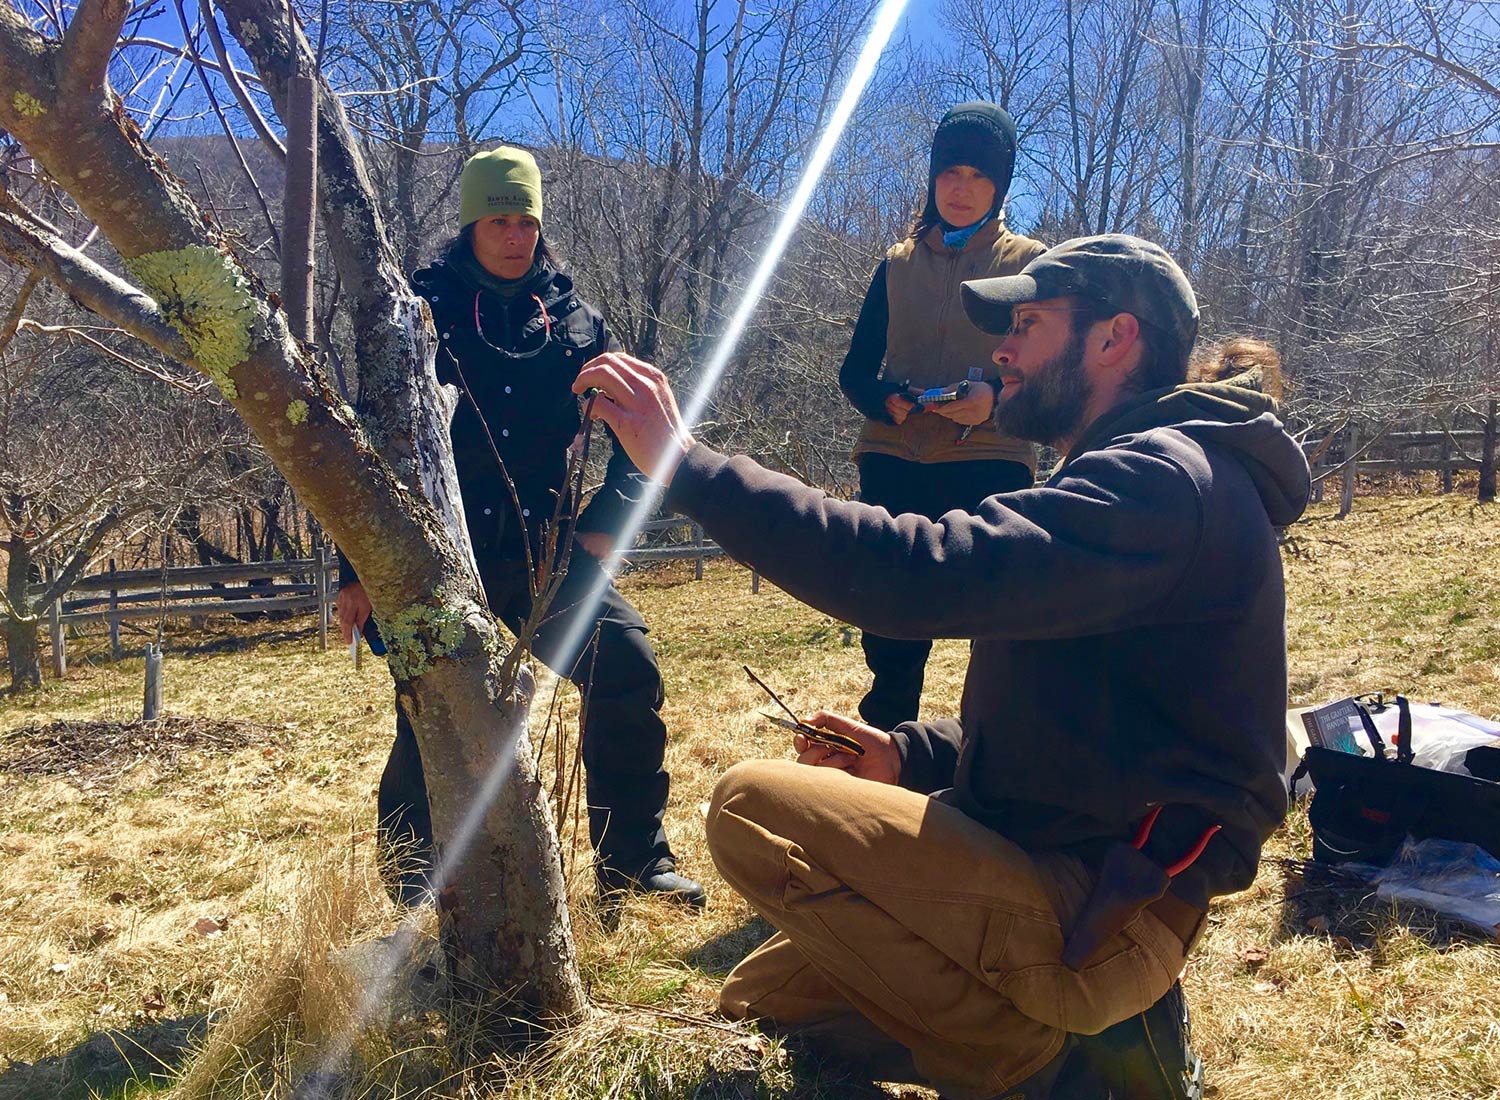 SHO Farm: vegan wild farming in a cold climate | grafting tutorial with our horticulturist, zach leonard of high hopes orchards